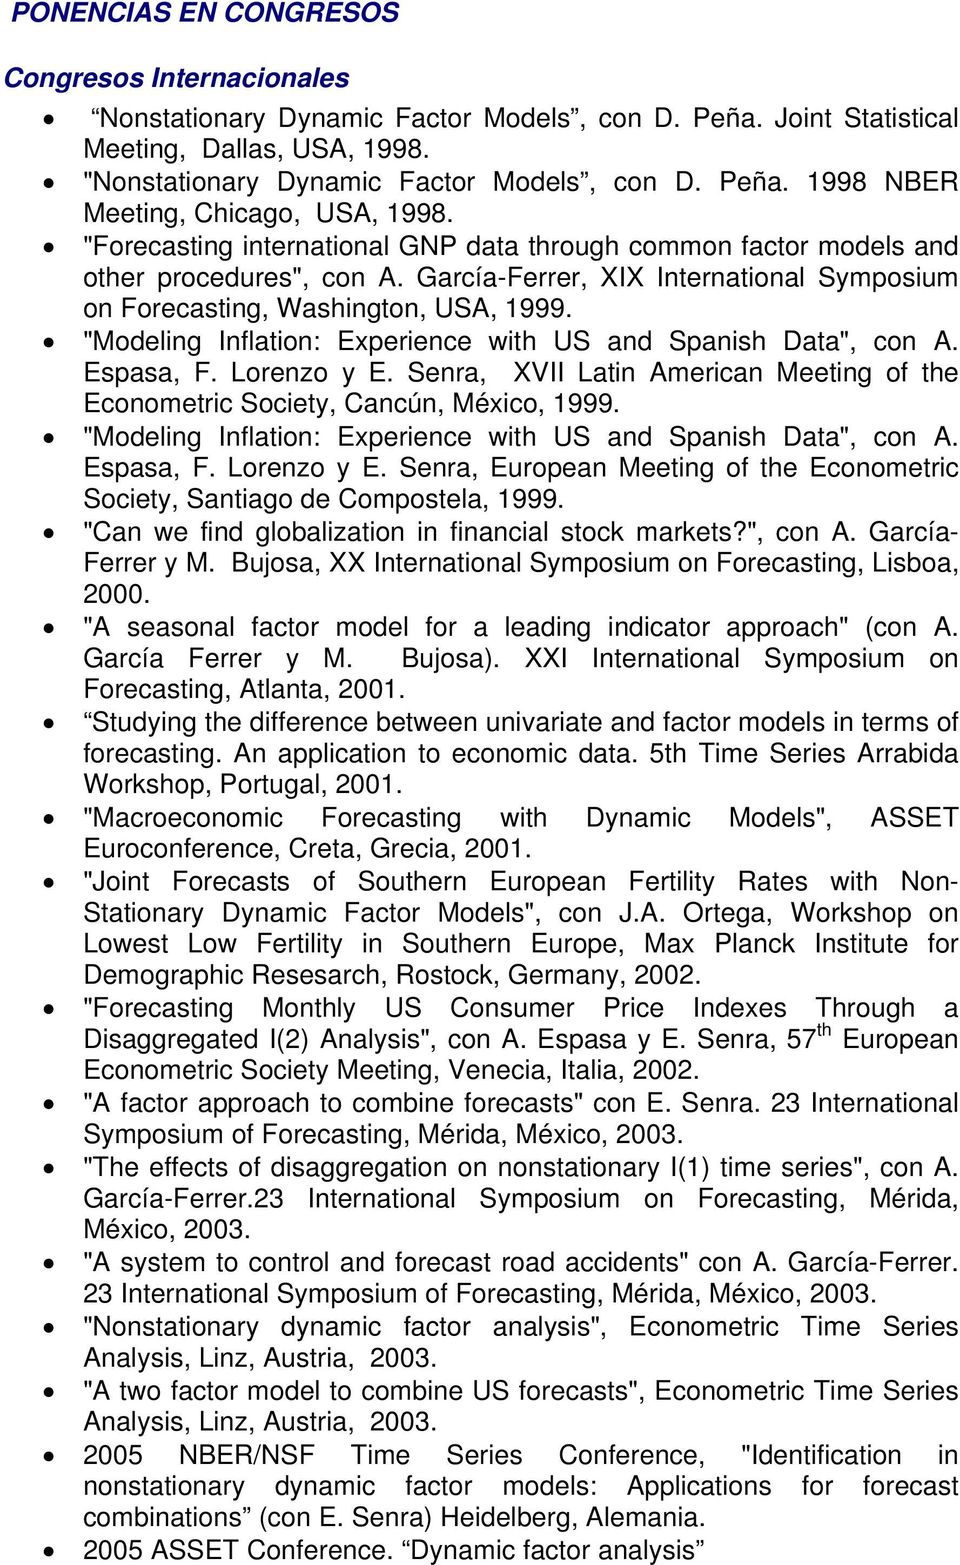 "Modeling Inflation: Experience with US and Spanish Data", con A. Espasa, F. Lorenzo y E. Senra, XVII Latin American Meeting of the Econometric Society, Cancún, México, 1999.